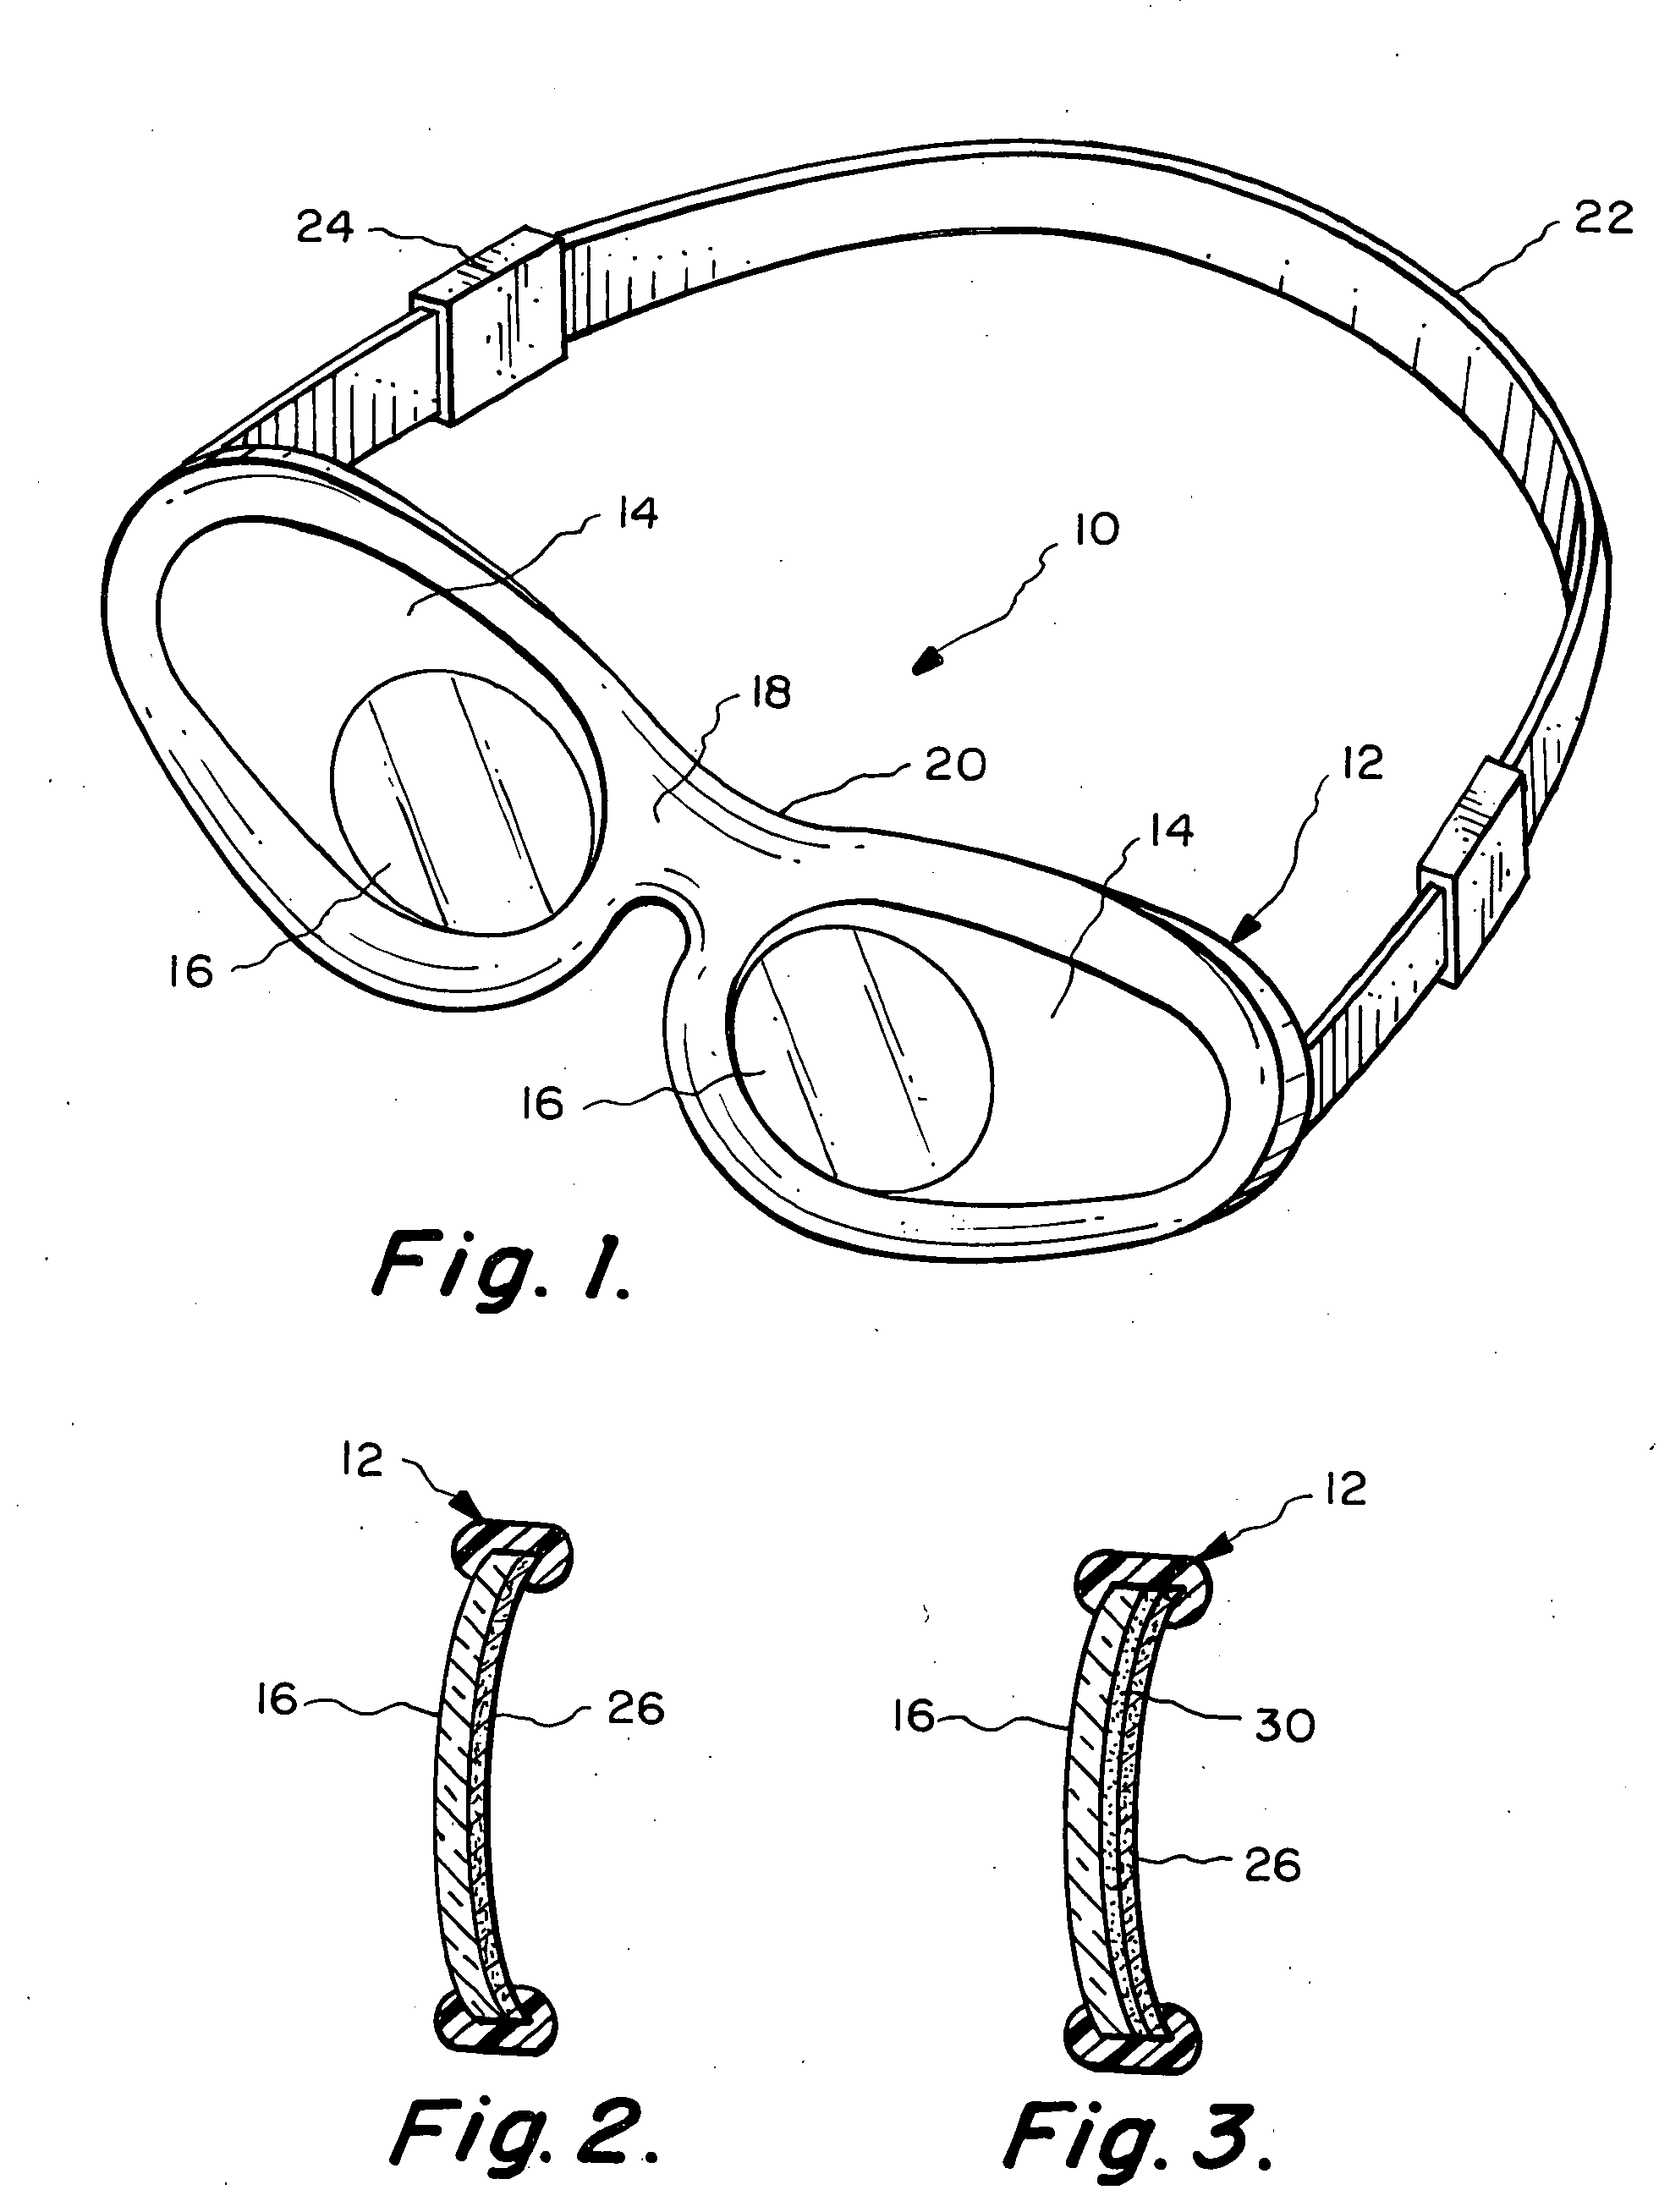 Eye Goggles Having Opaque or Restricted View Lenses